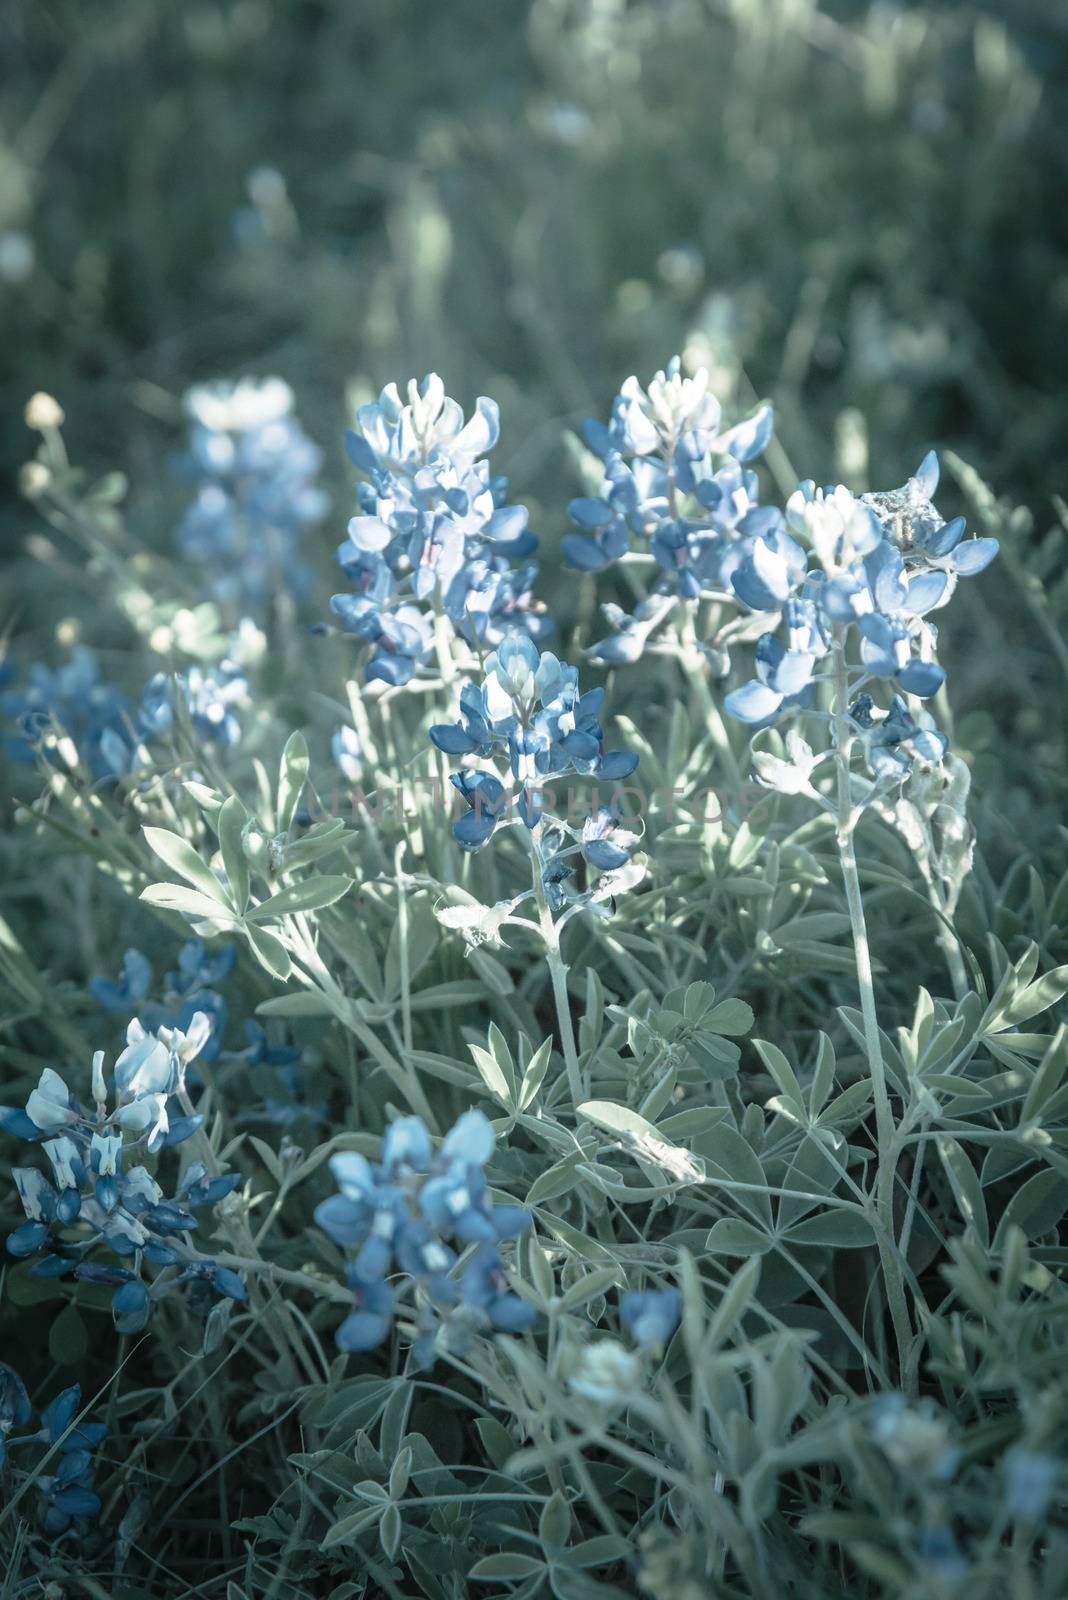 Vintage tone close-up view a bush of Bluebonnet full blossom at springtime near Dallas, Texas, USA. This is the official state flower of Texas. Wildflower blooming at sunset background